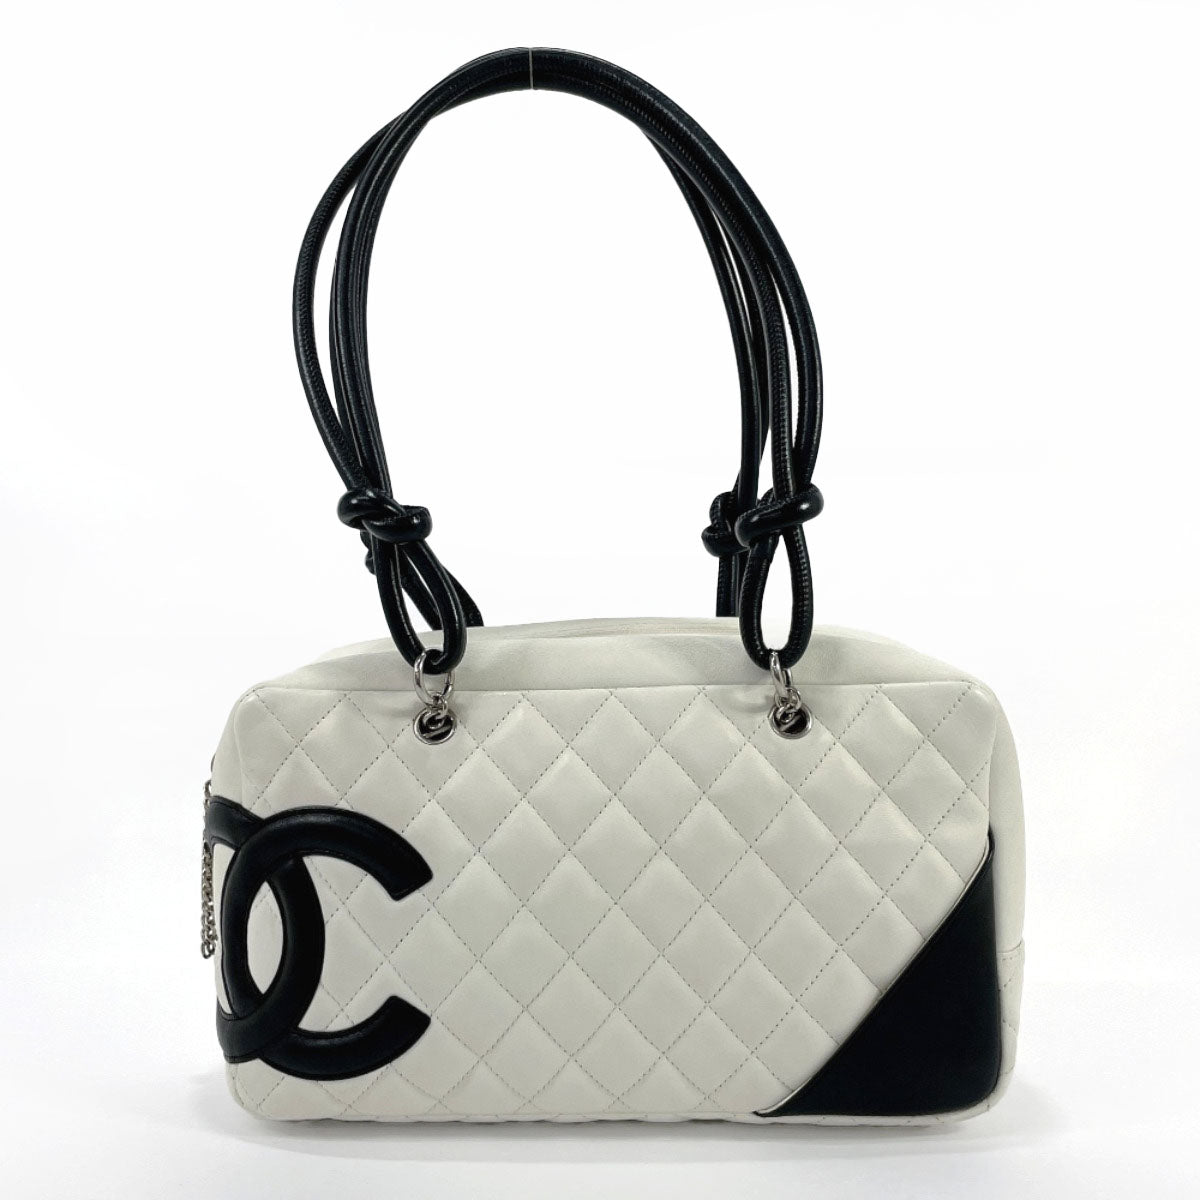 CHANEL Shoulder Bag A25171 Bowling bag Cambon line lambskin white white  Women Used